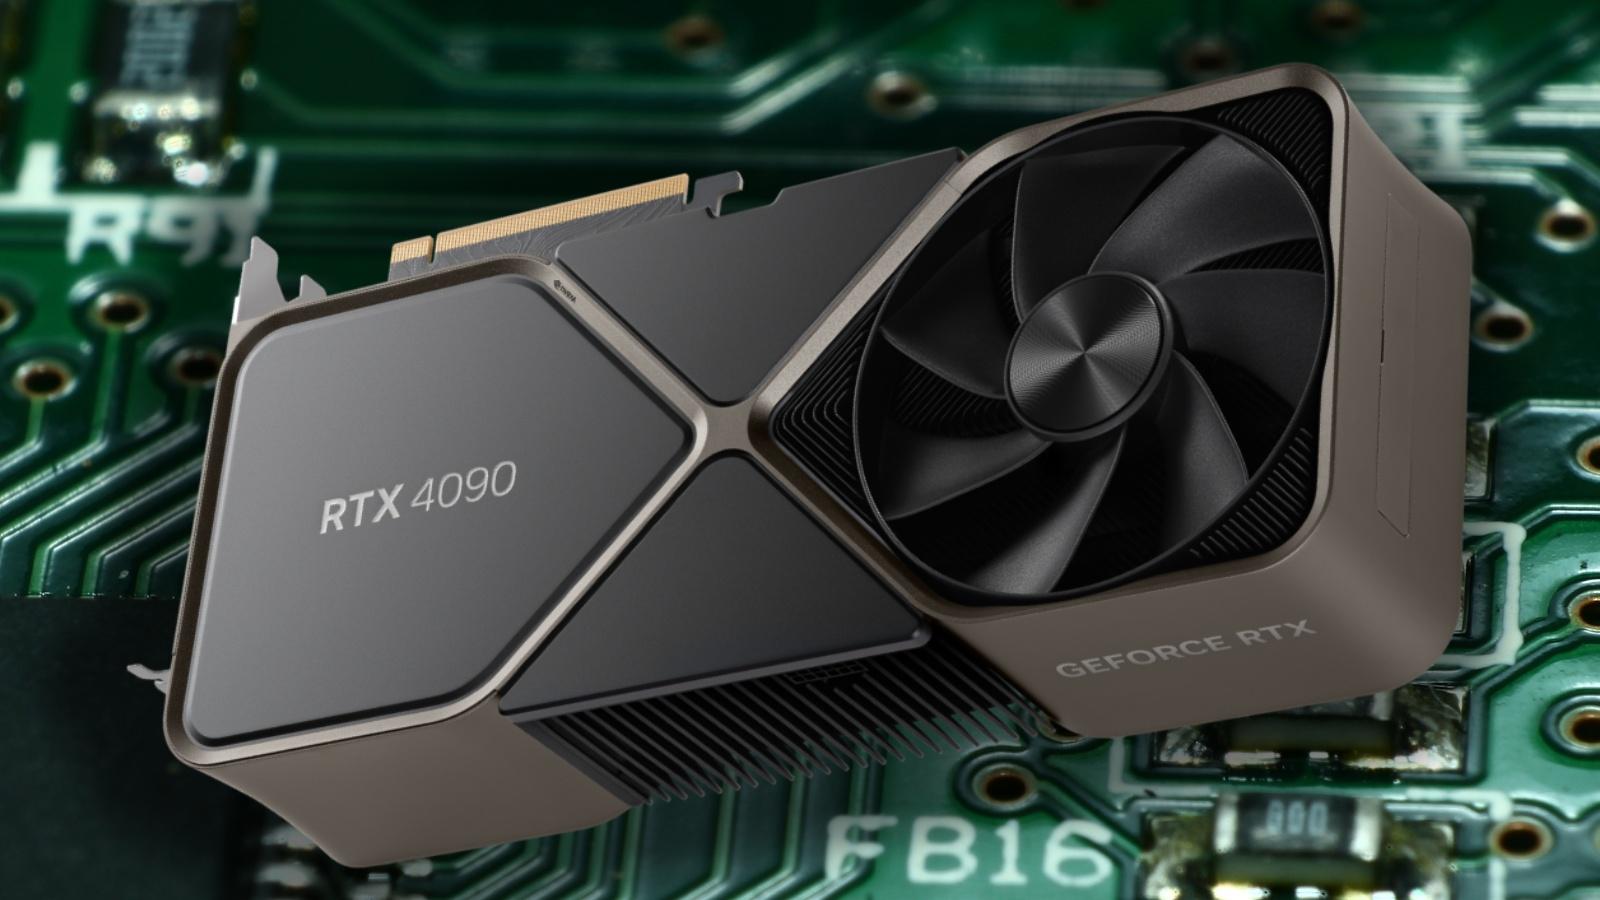 Alleged Nvidia RTX 4090 benchmark suggests it's an absolute monster - Neowin